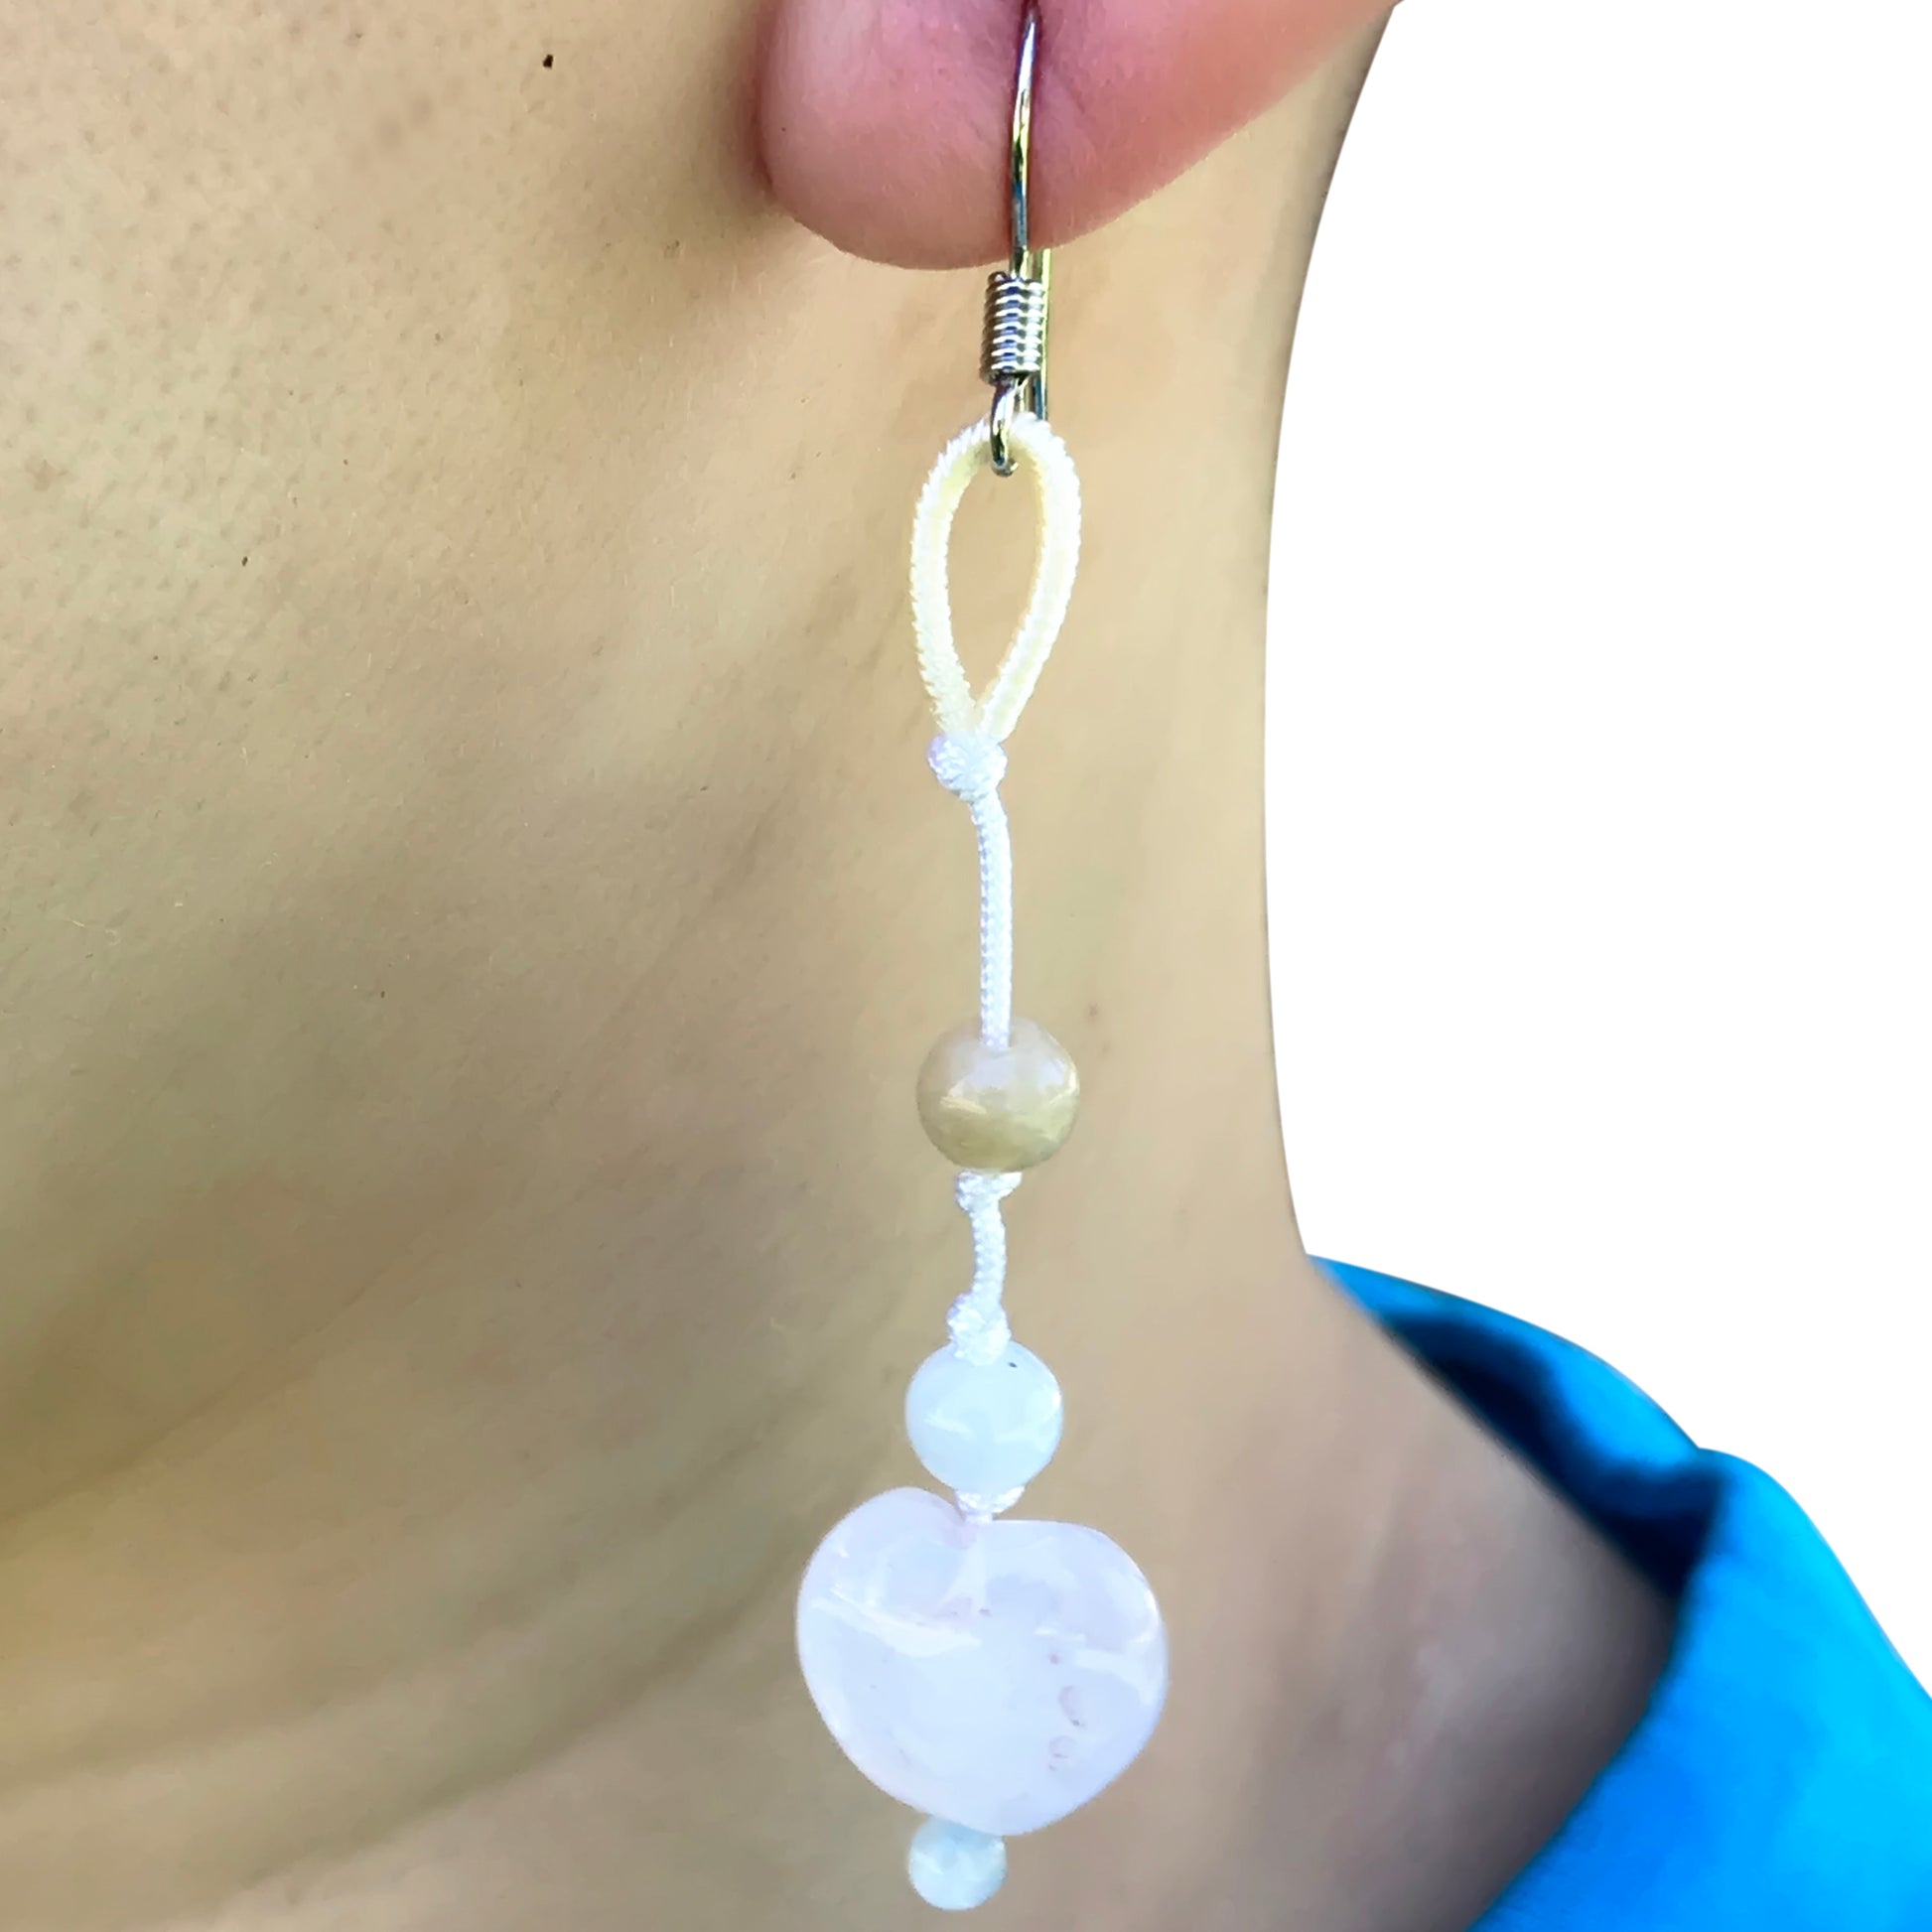 Get Ready to Shine with Rose Quartz Heart Earrings made with White Cord